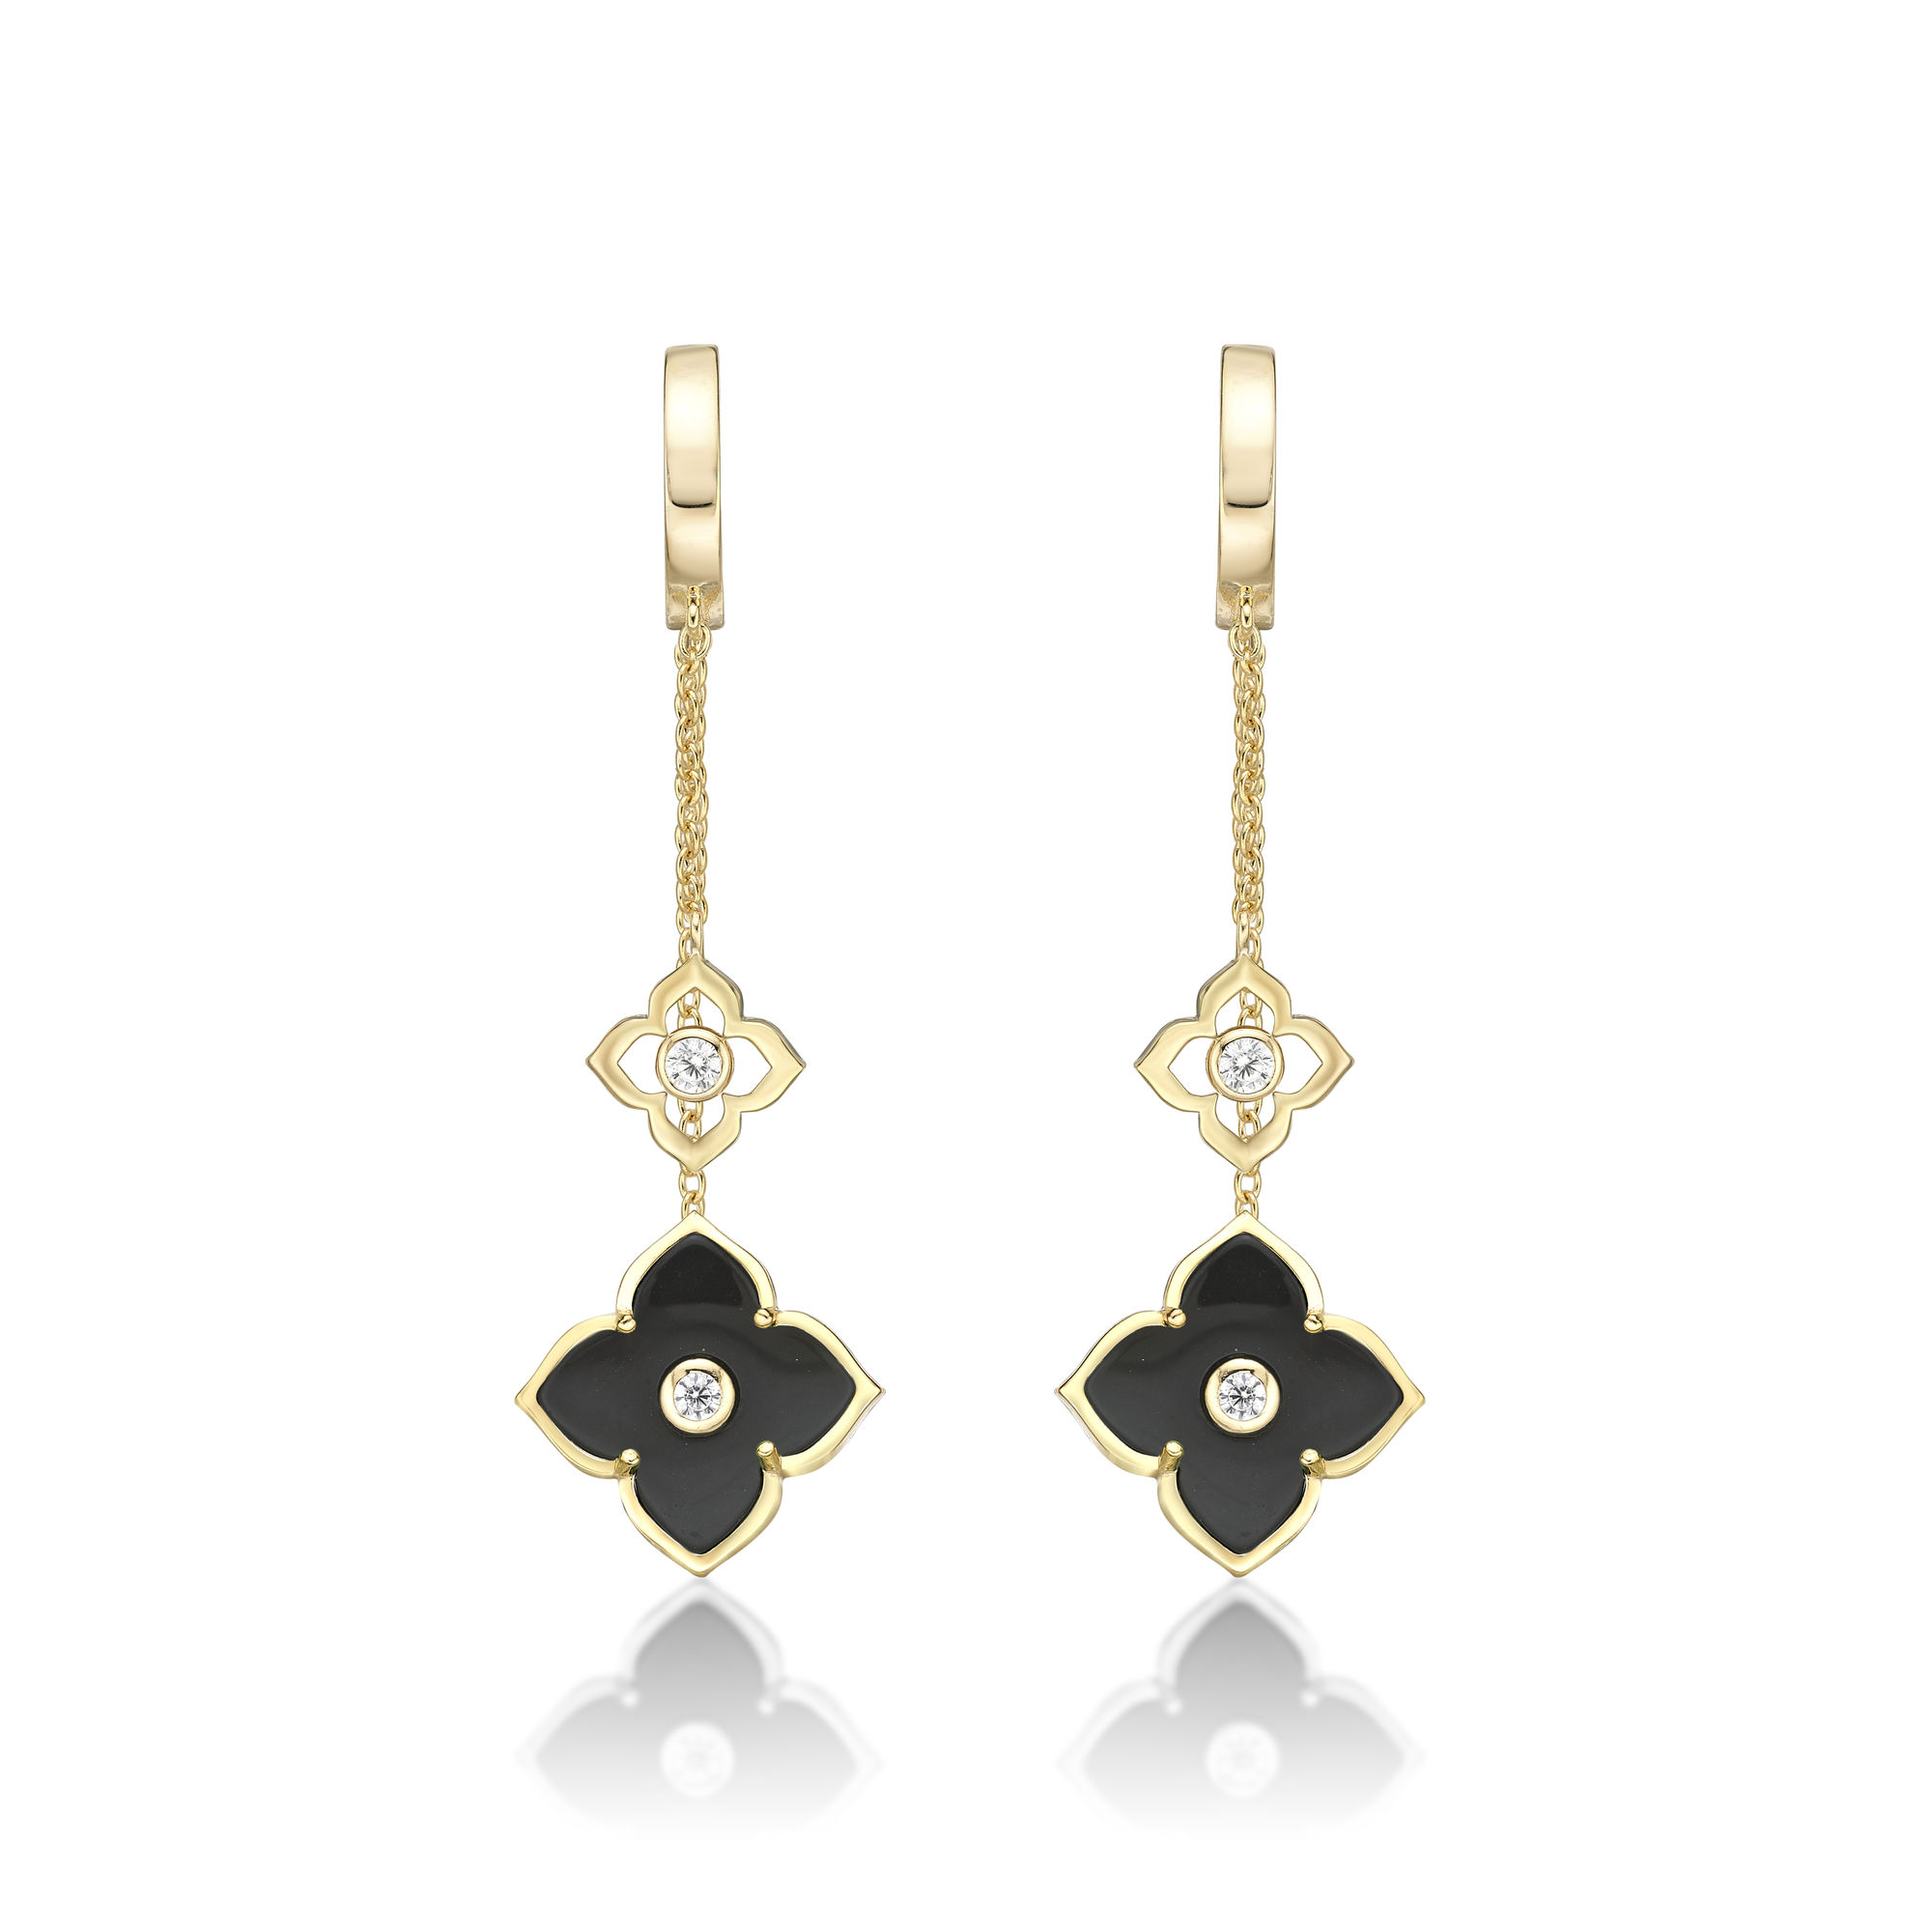 Lavari Jewelers Women's Black Onyx Double Flower Dangle Drop Earrings with Yellow Gold Plating and Hinged Post Back, 925 Sterling Silver, Cubic Zirconia